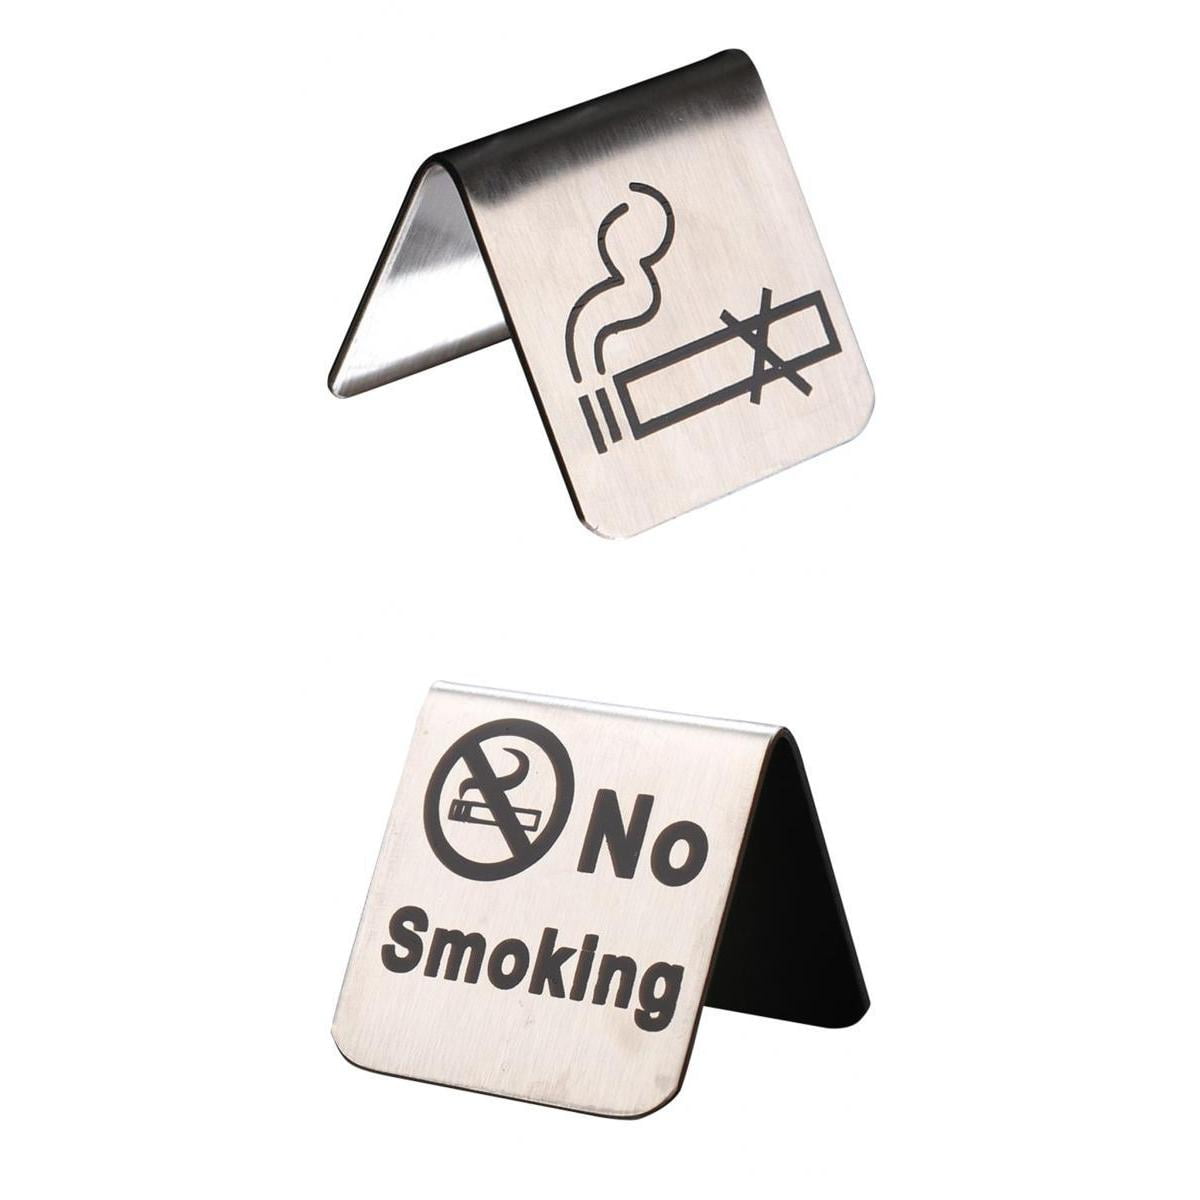 NEW 2Pcs Stainless Steel "No-Smoking" Table Sign for Restaurant Office Hotel 